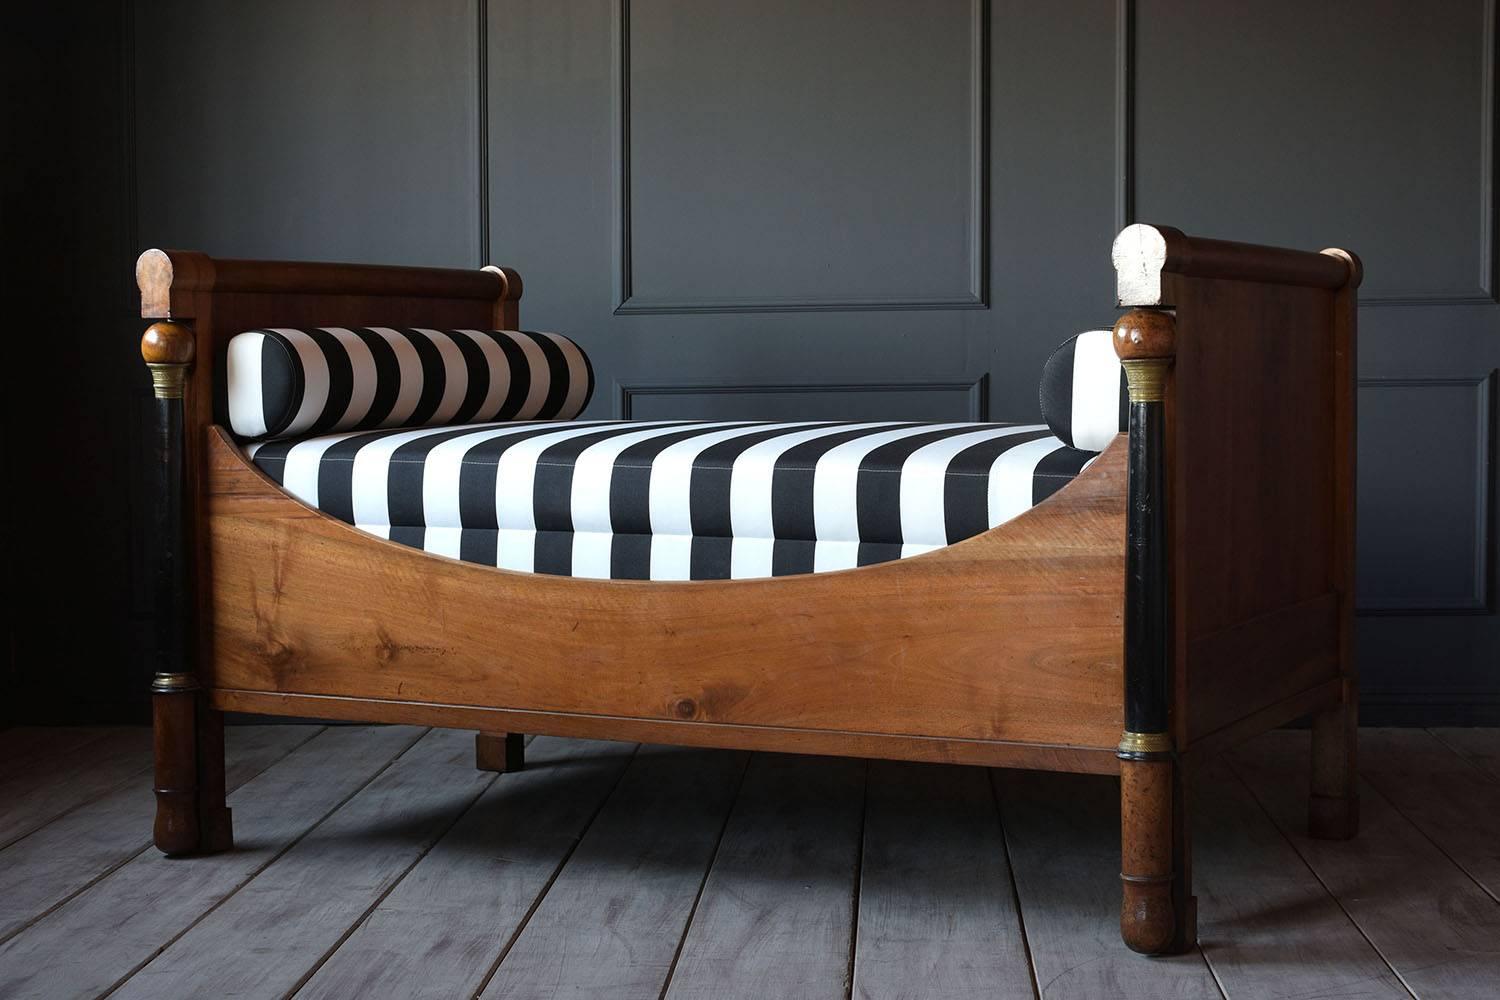 This 1840s French Empire-style daybed features a walnut wood frame with a black and walnut stained finish. The rectangular head-board and foot-board have a rounded upper bar and carved columns on the side with bronze ornaments on the top and bottom.